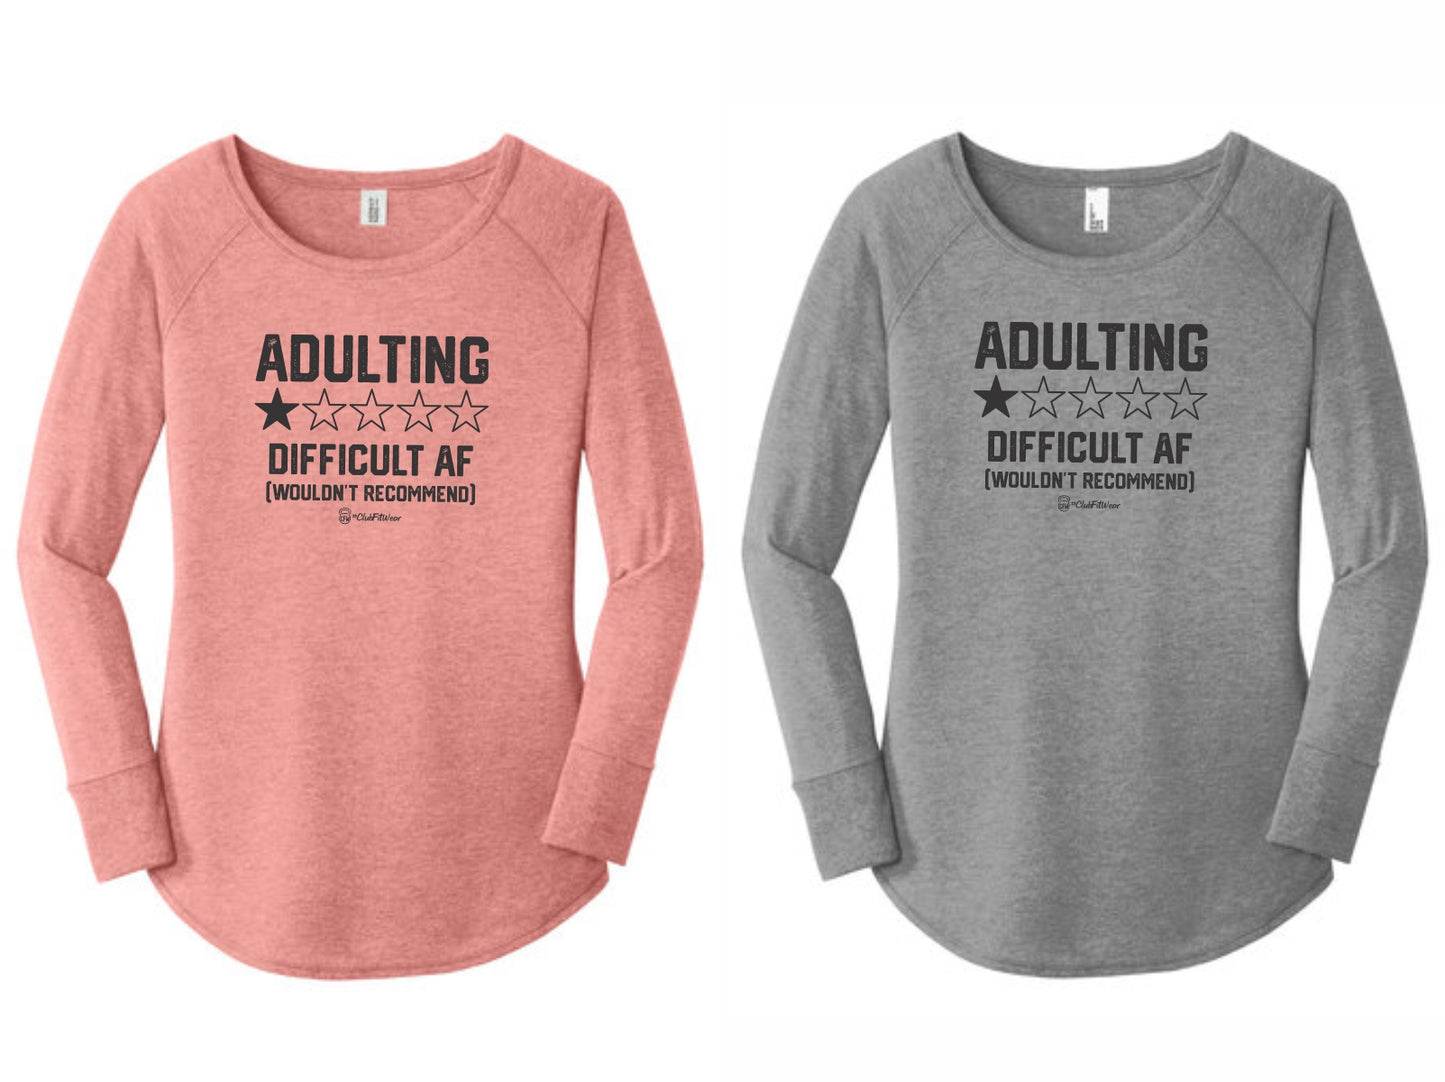 Adulting Difficult AF Wouldn't Recommend - Long Sleeve Tunic